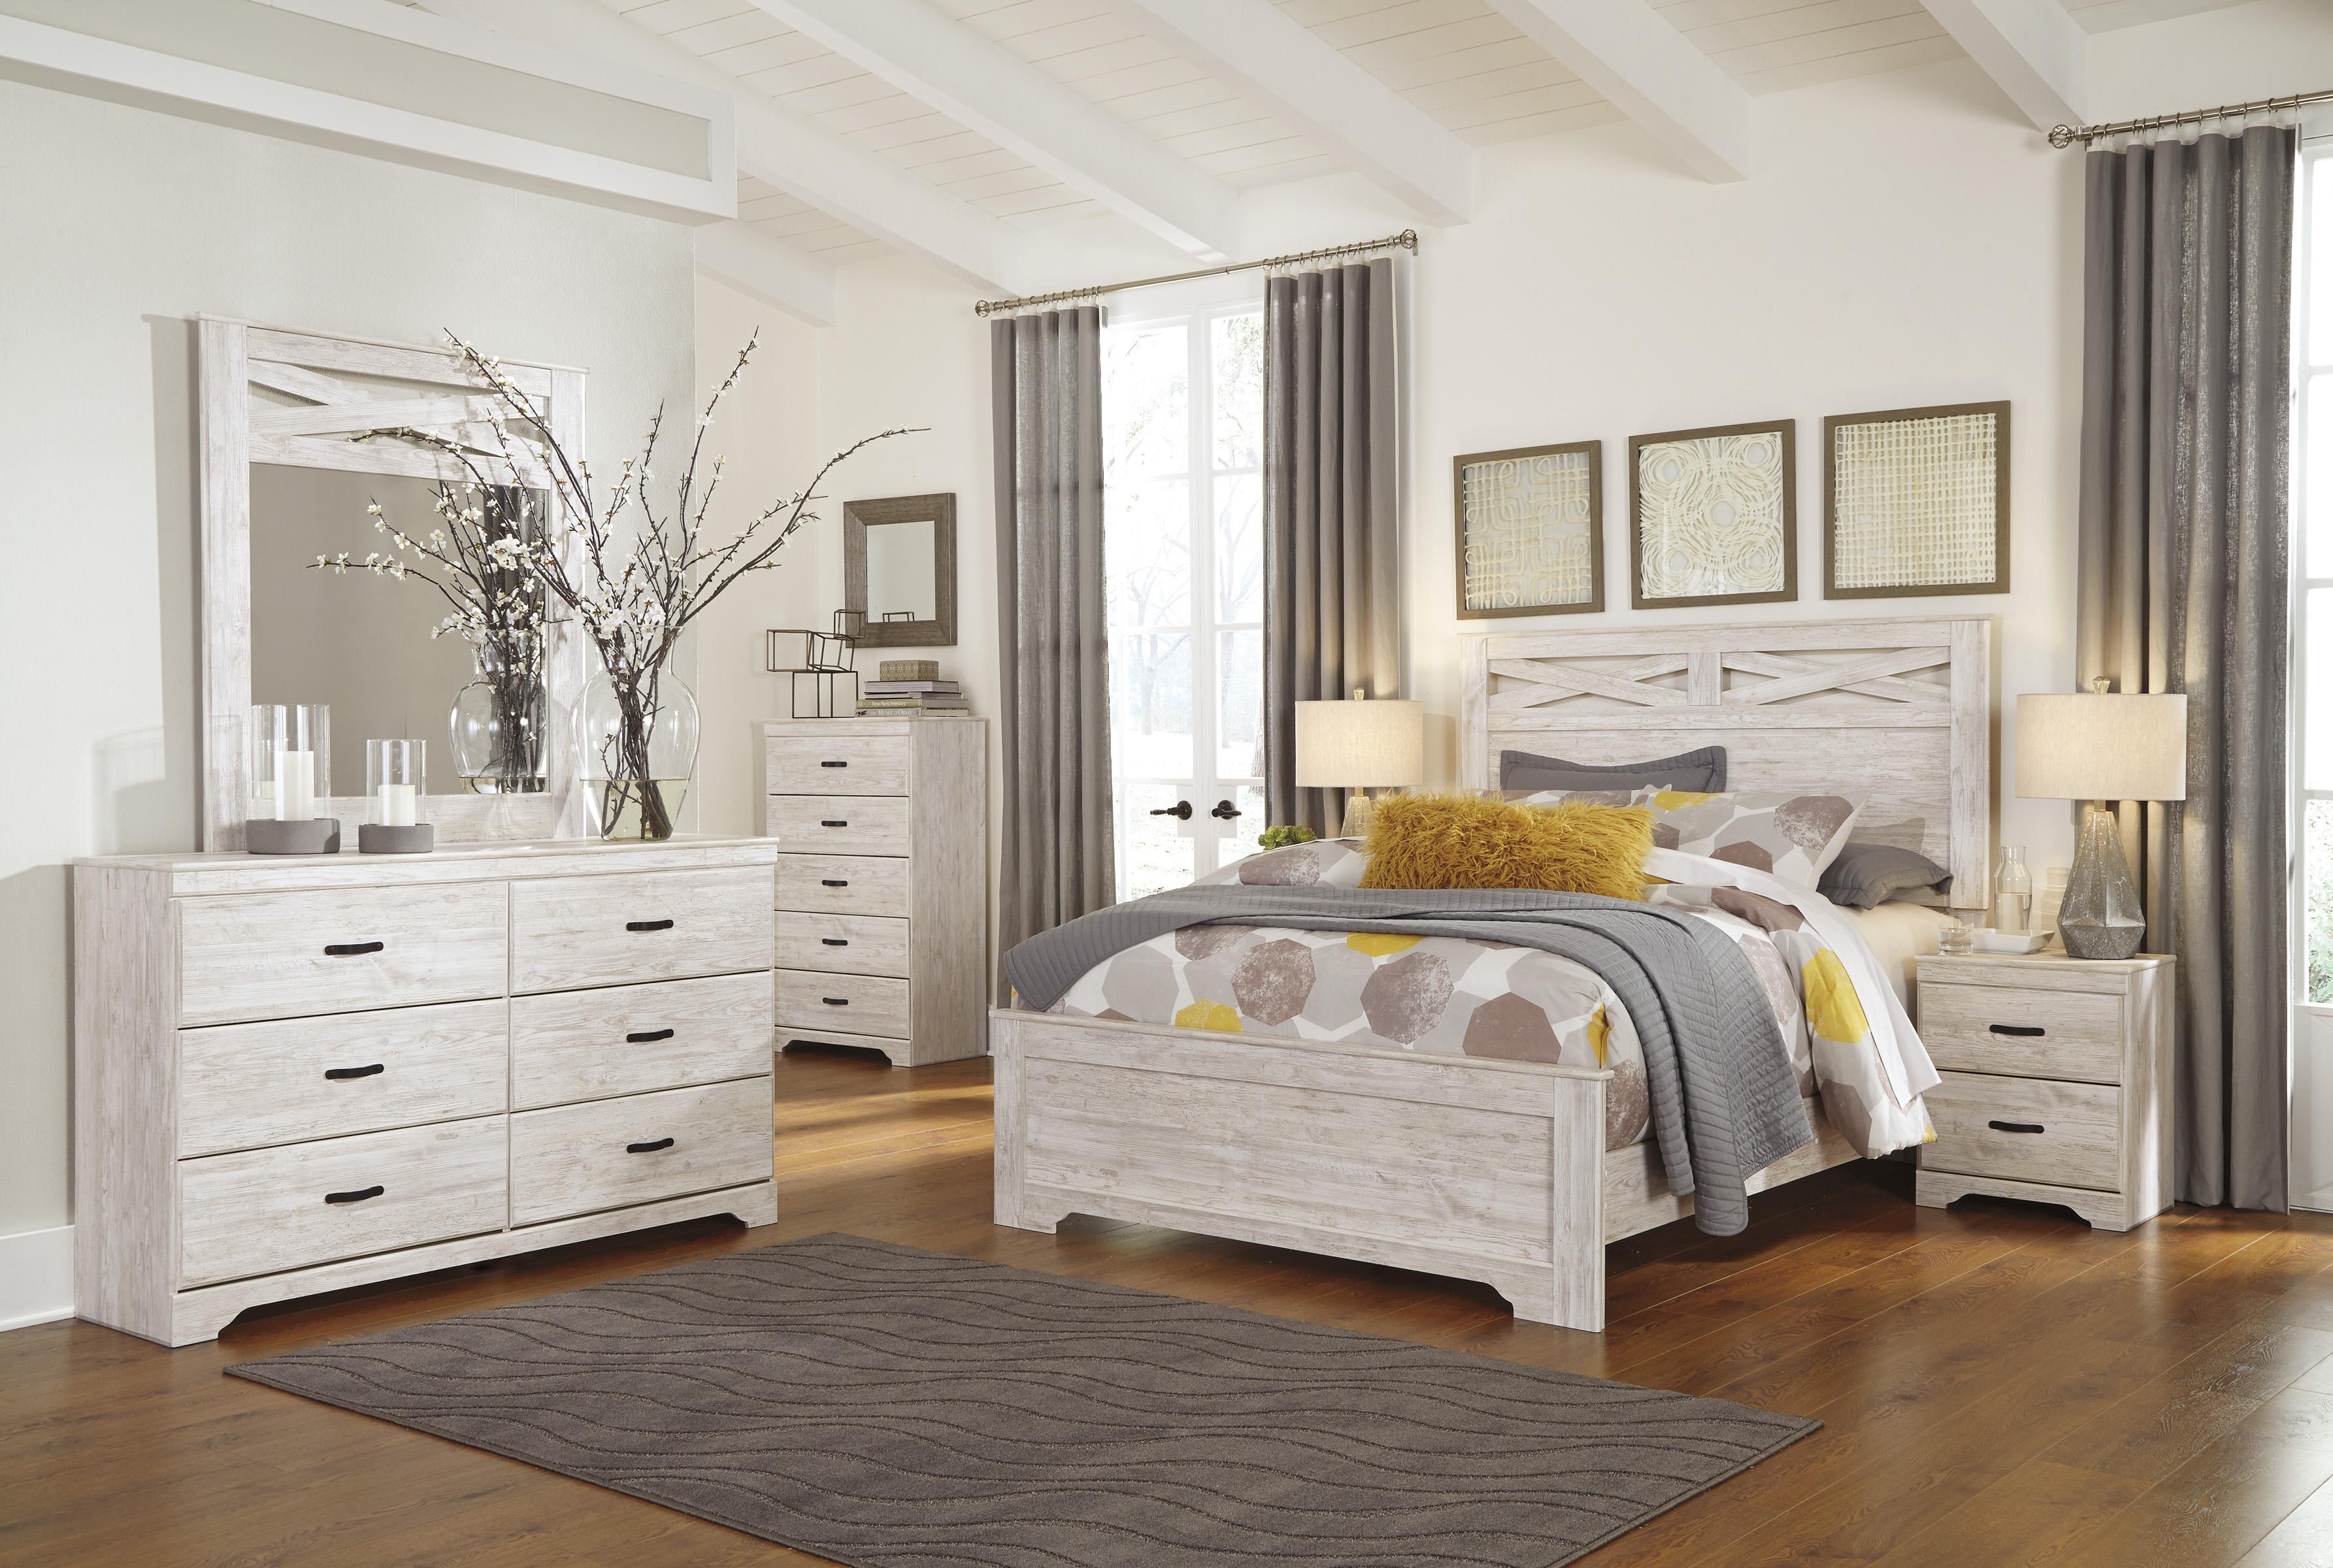 

    
Ashley Briartown B218 Queen Size Panel Bedroom Set 3pcs in Whitewash
